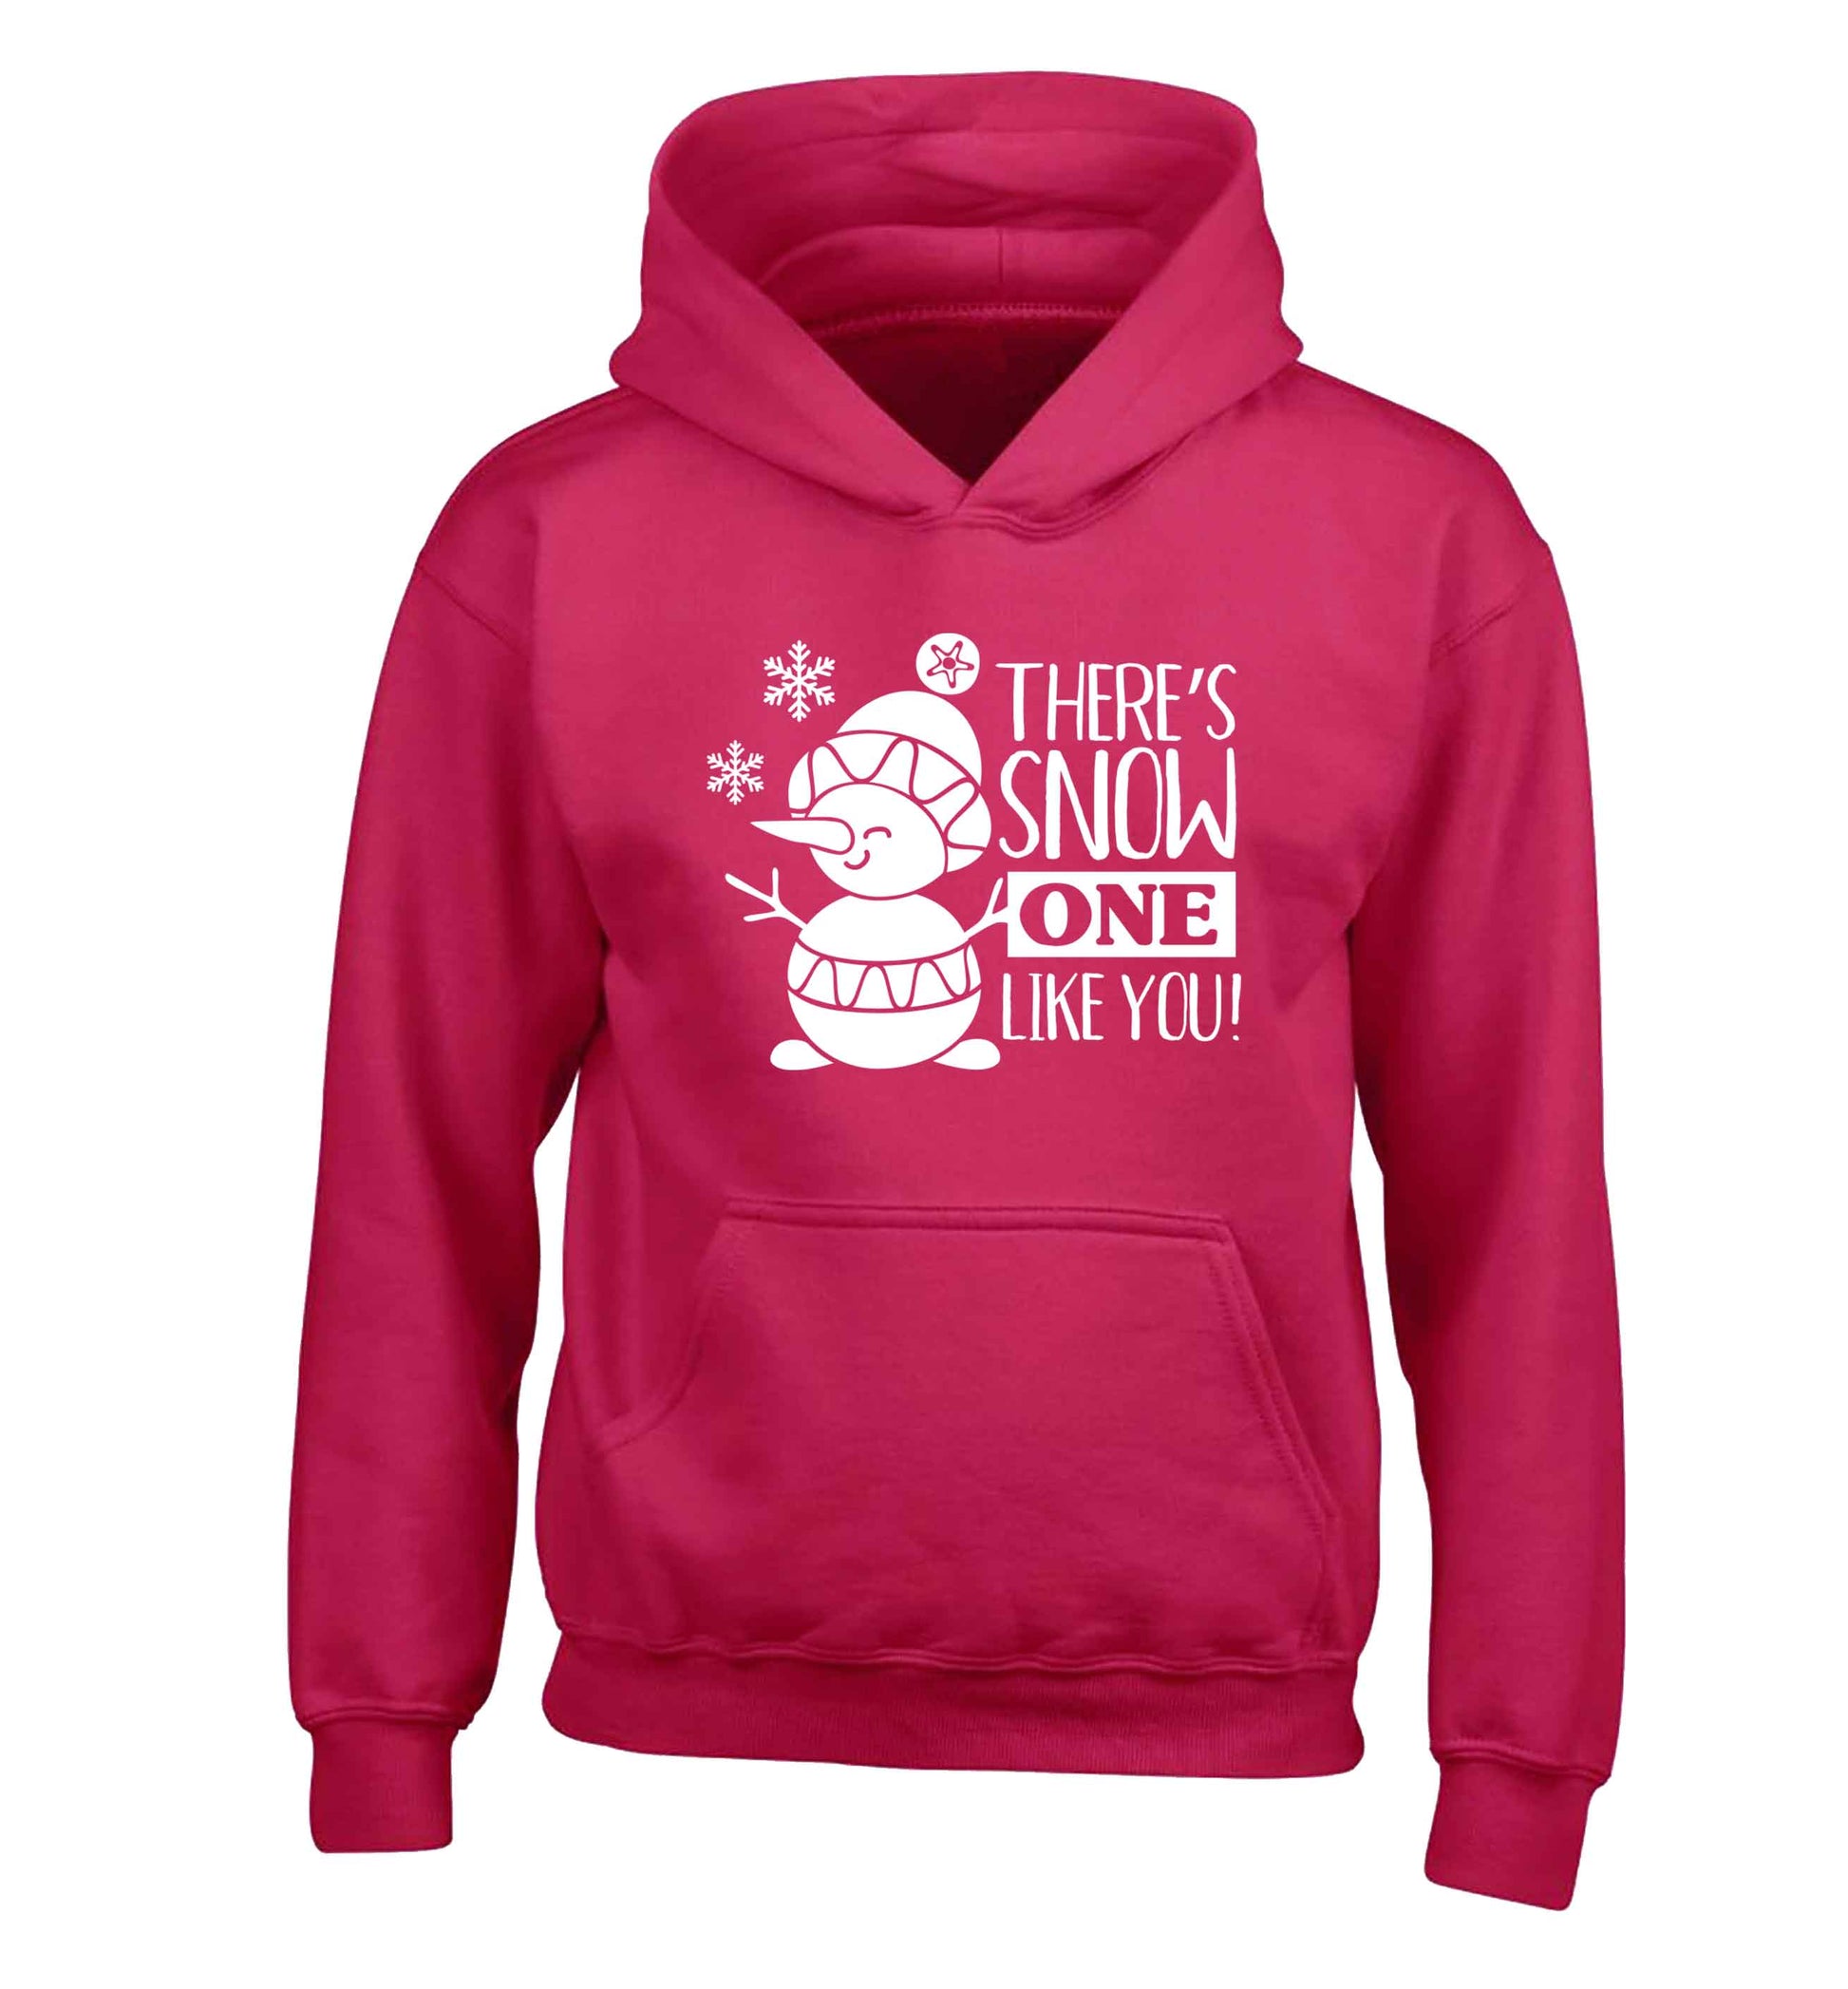 There's snow one like you children's pink hoodie 12-13 Years